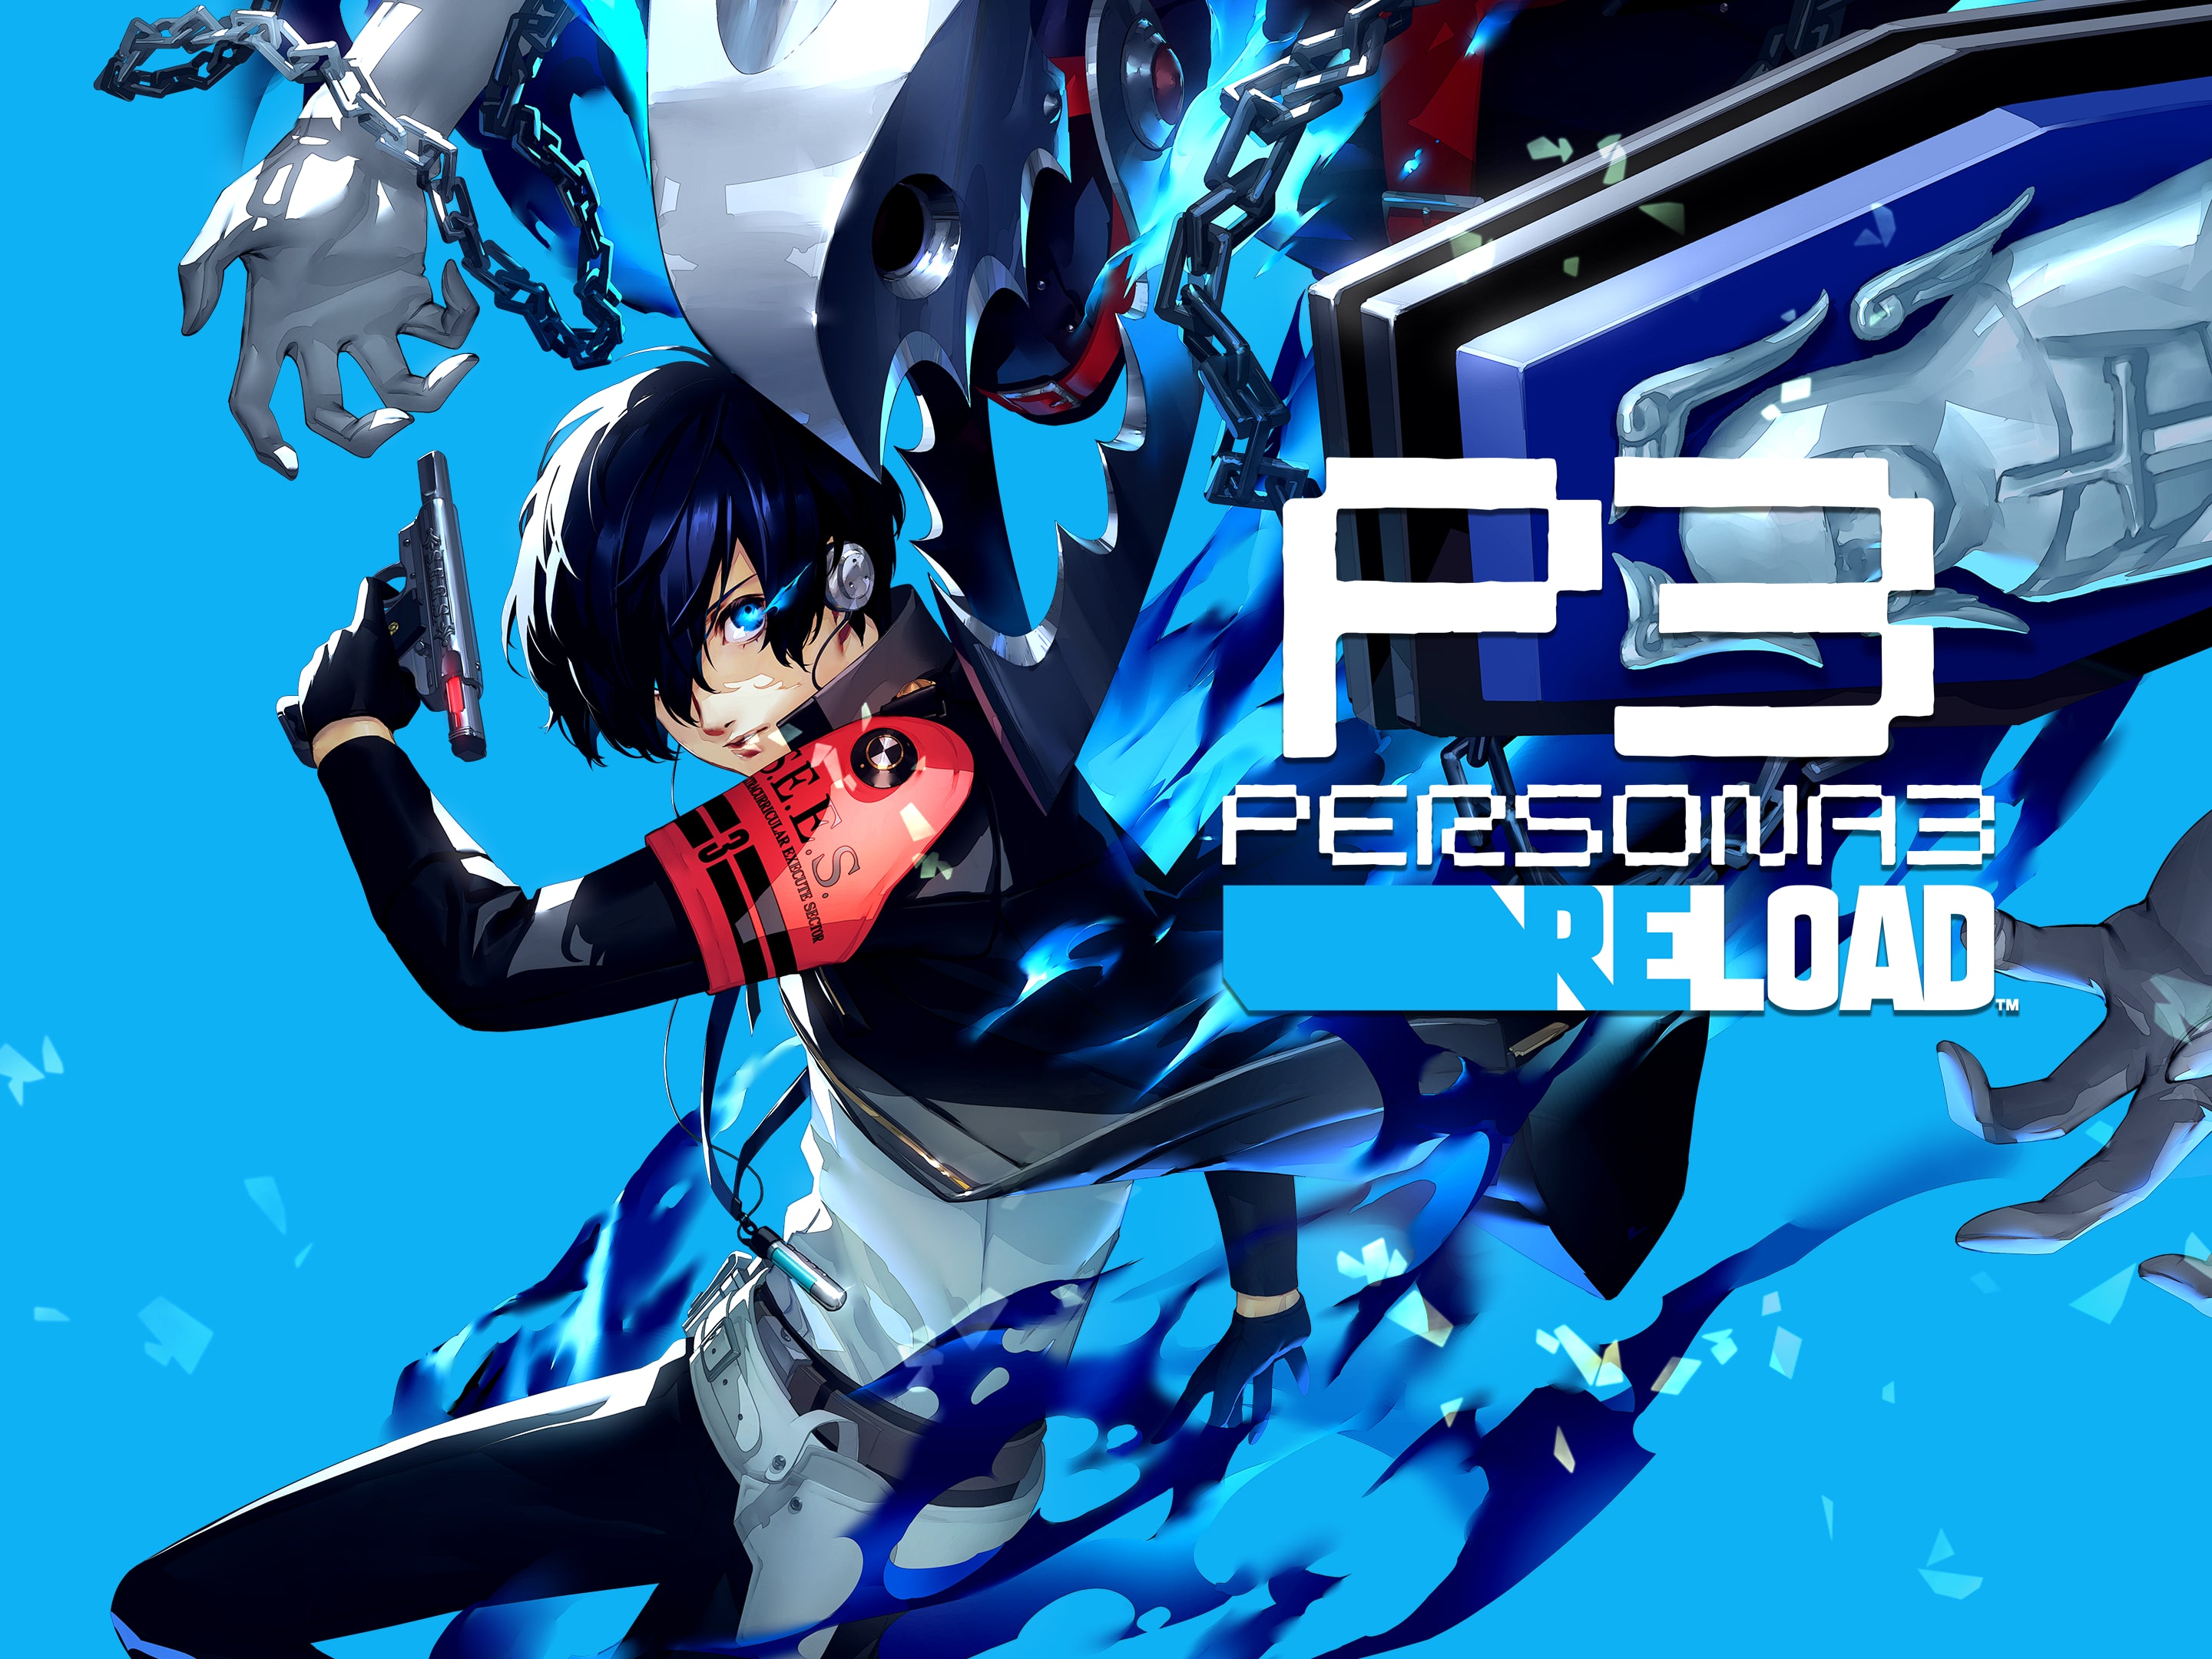 Will persona 3 reload launch for the ps4? : r/PERSoNA